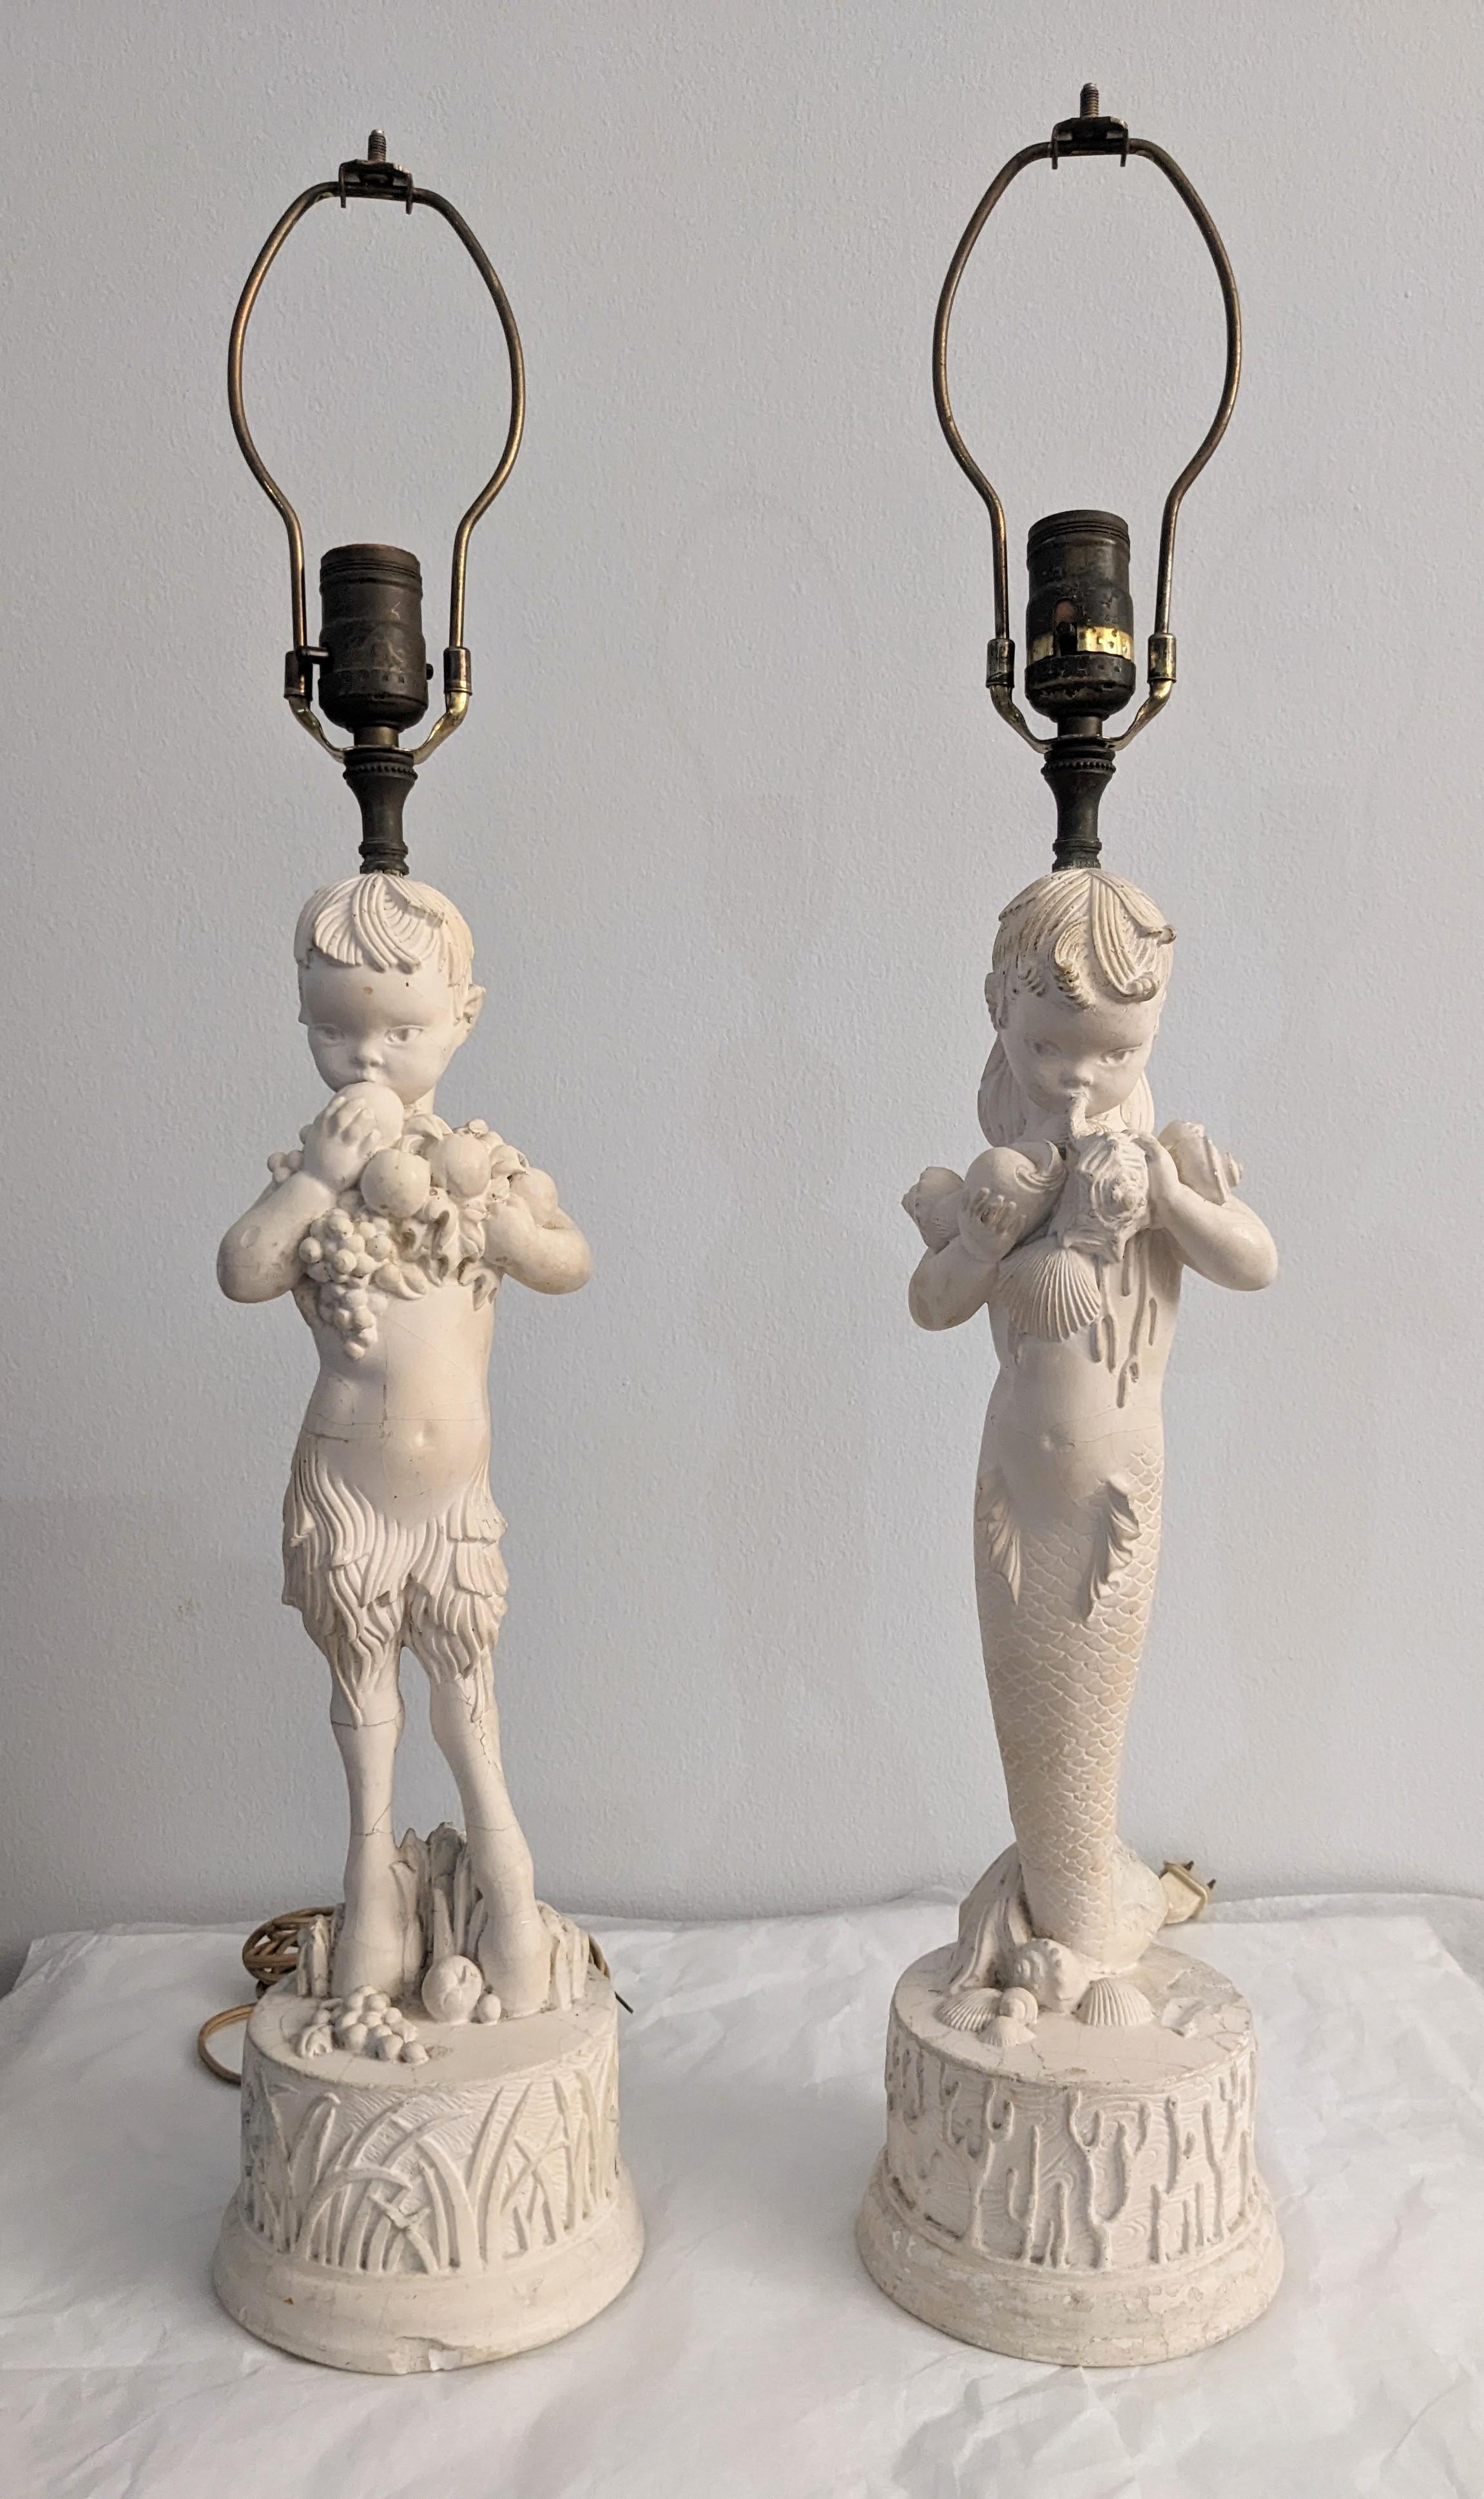 Pair of Charming Art Deco Plaster Surrealist Figural Lamps circa 1940's. Charming Pan and Mermaid figures are molded in plaster.  Pan is carrying fruit set on a base of grass and the mermaid is carrying shells set on coral base. 
There are requisite